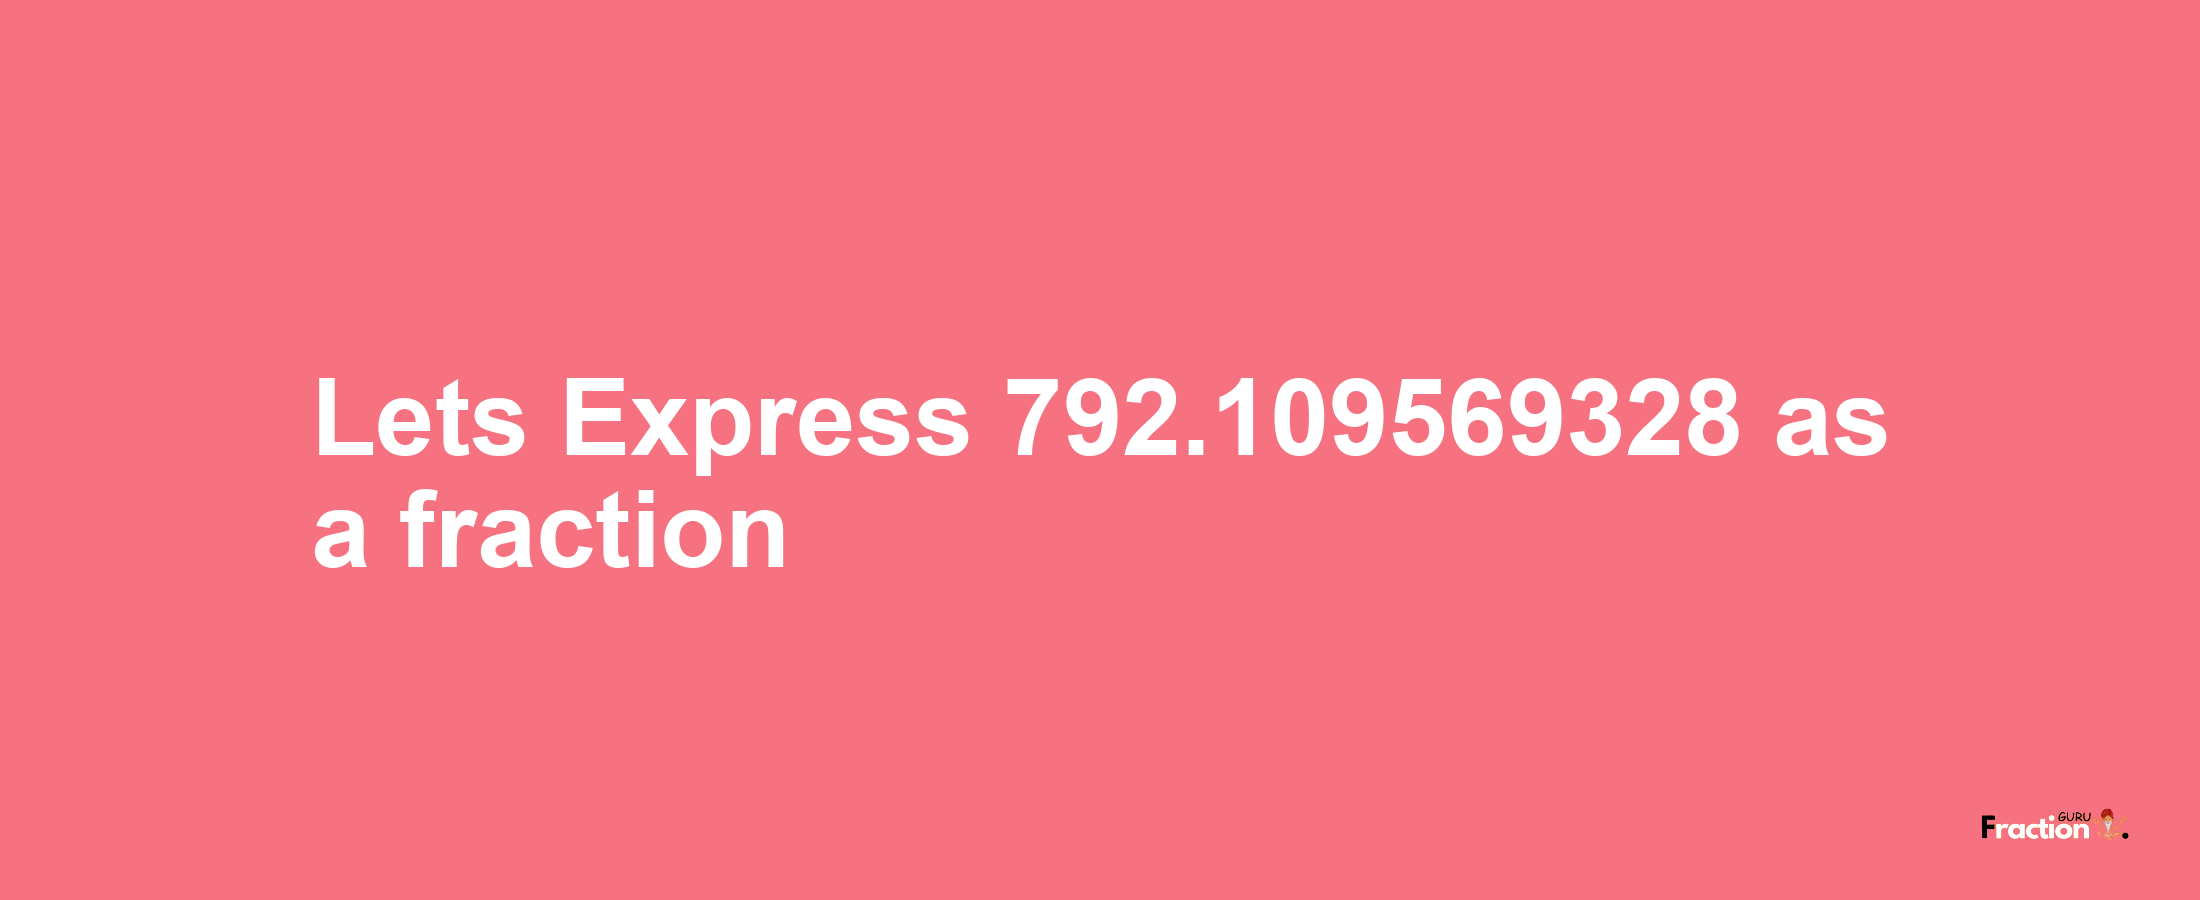 Lets Express 792.109569328 as afraction